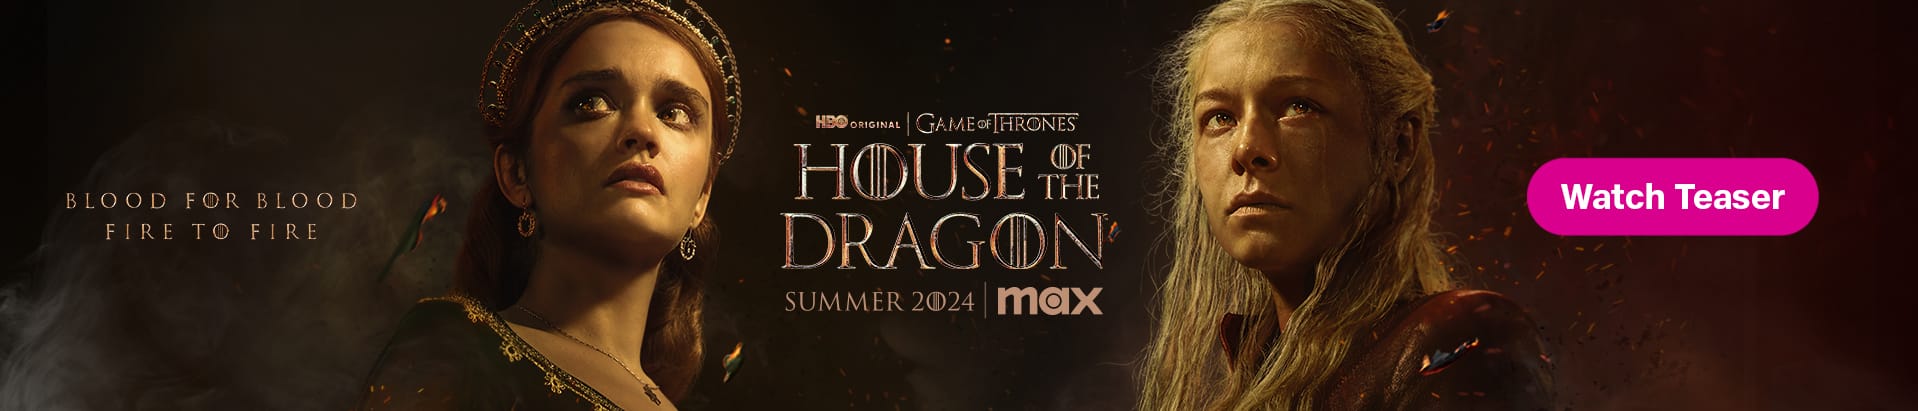 Game Of Thrones TV Show: Watch All Seasons, Full Episodes & Videos Online  In HD Quality On JioCinema